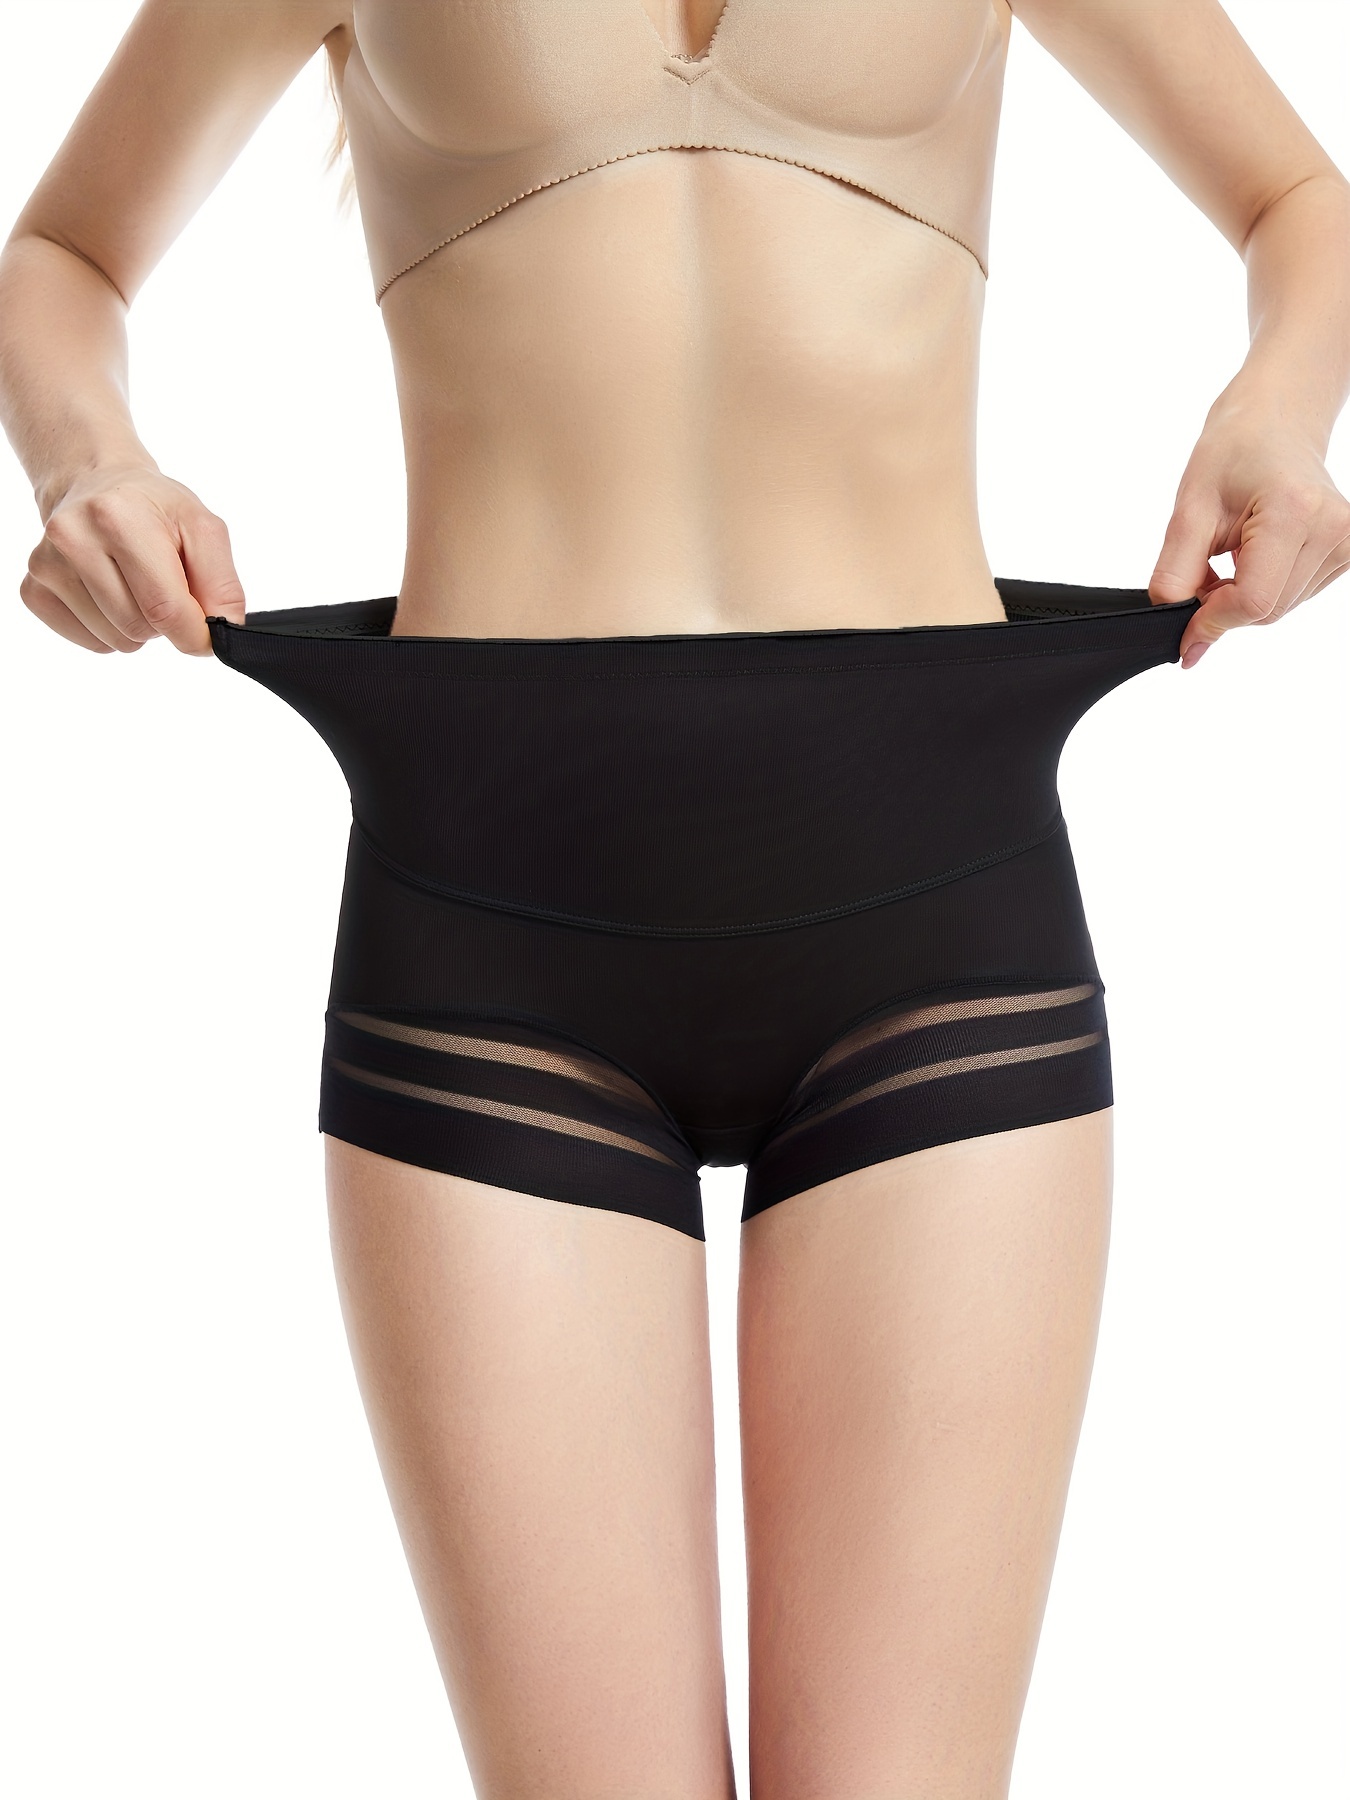 1Pc Women's Smooth Breathable High Waist Tummy Control Thong For